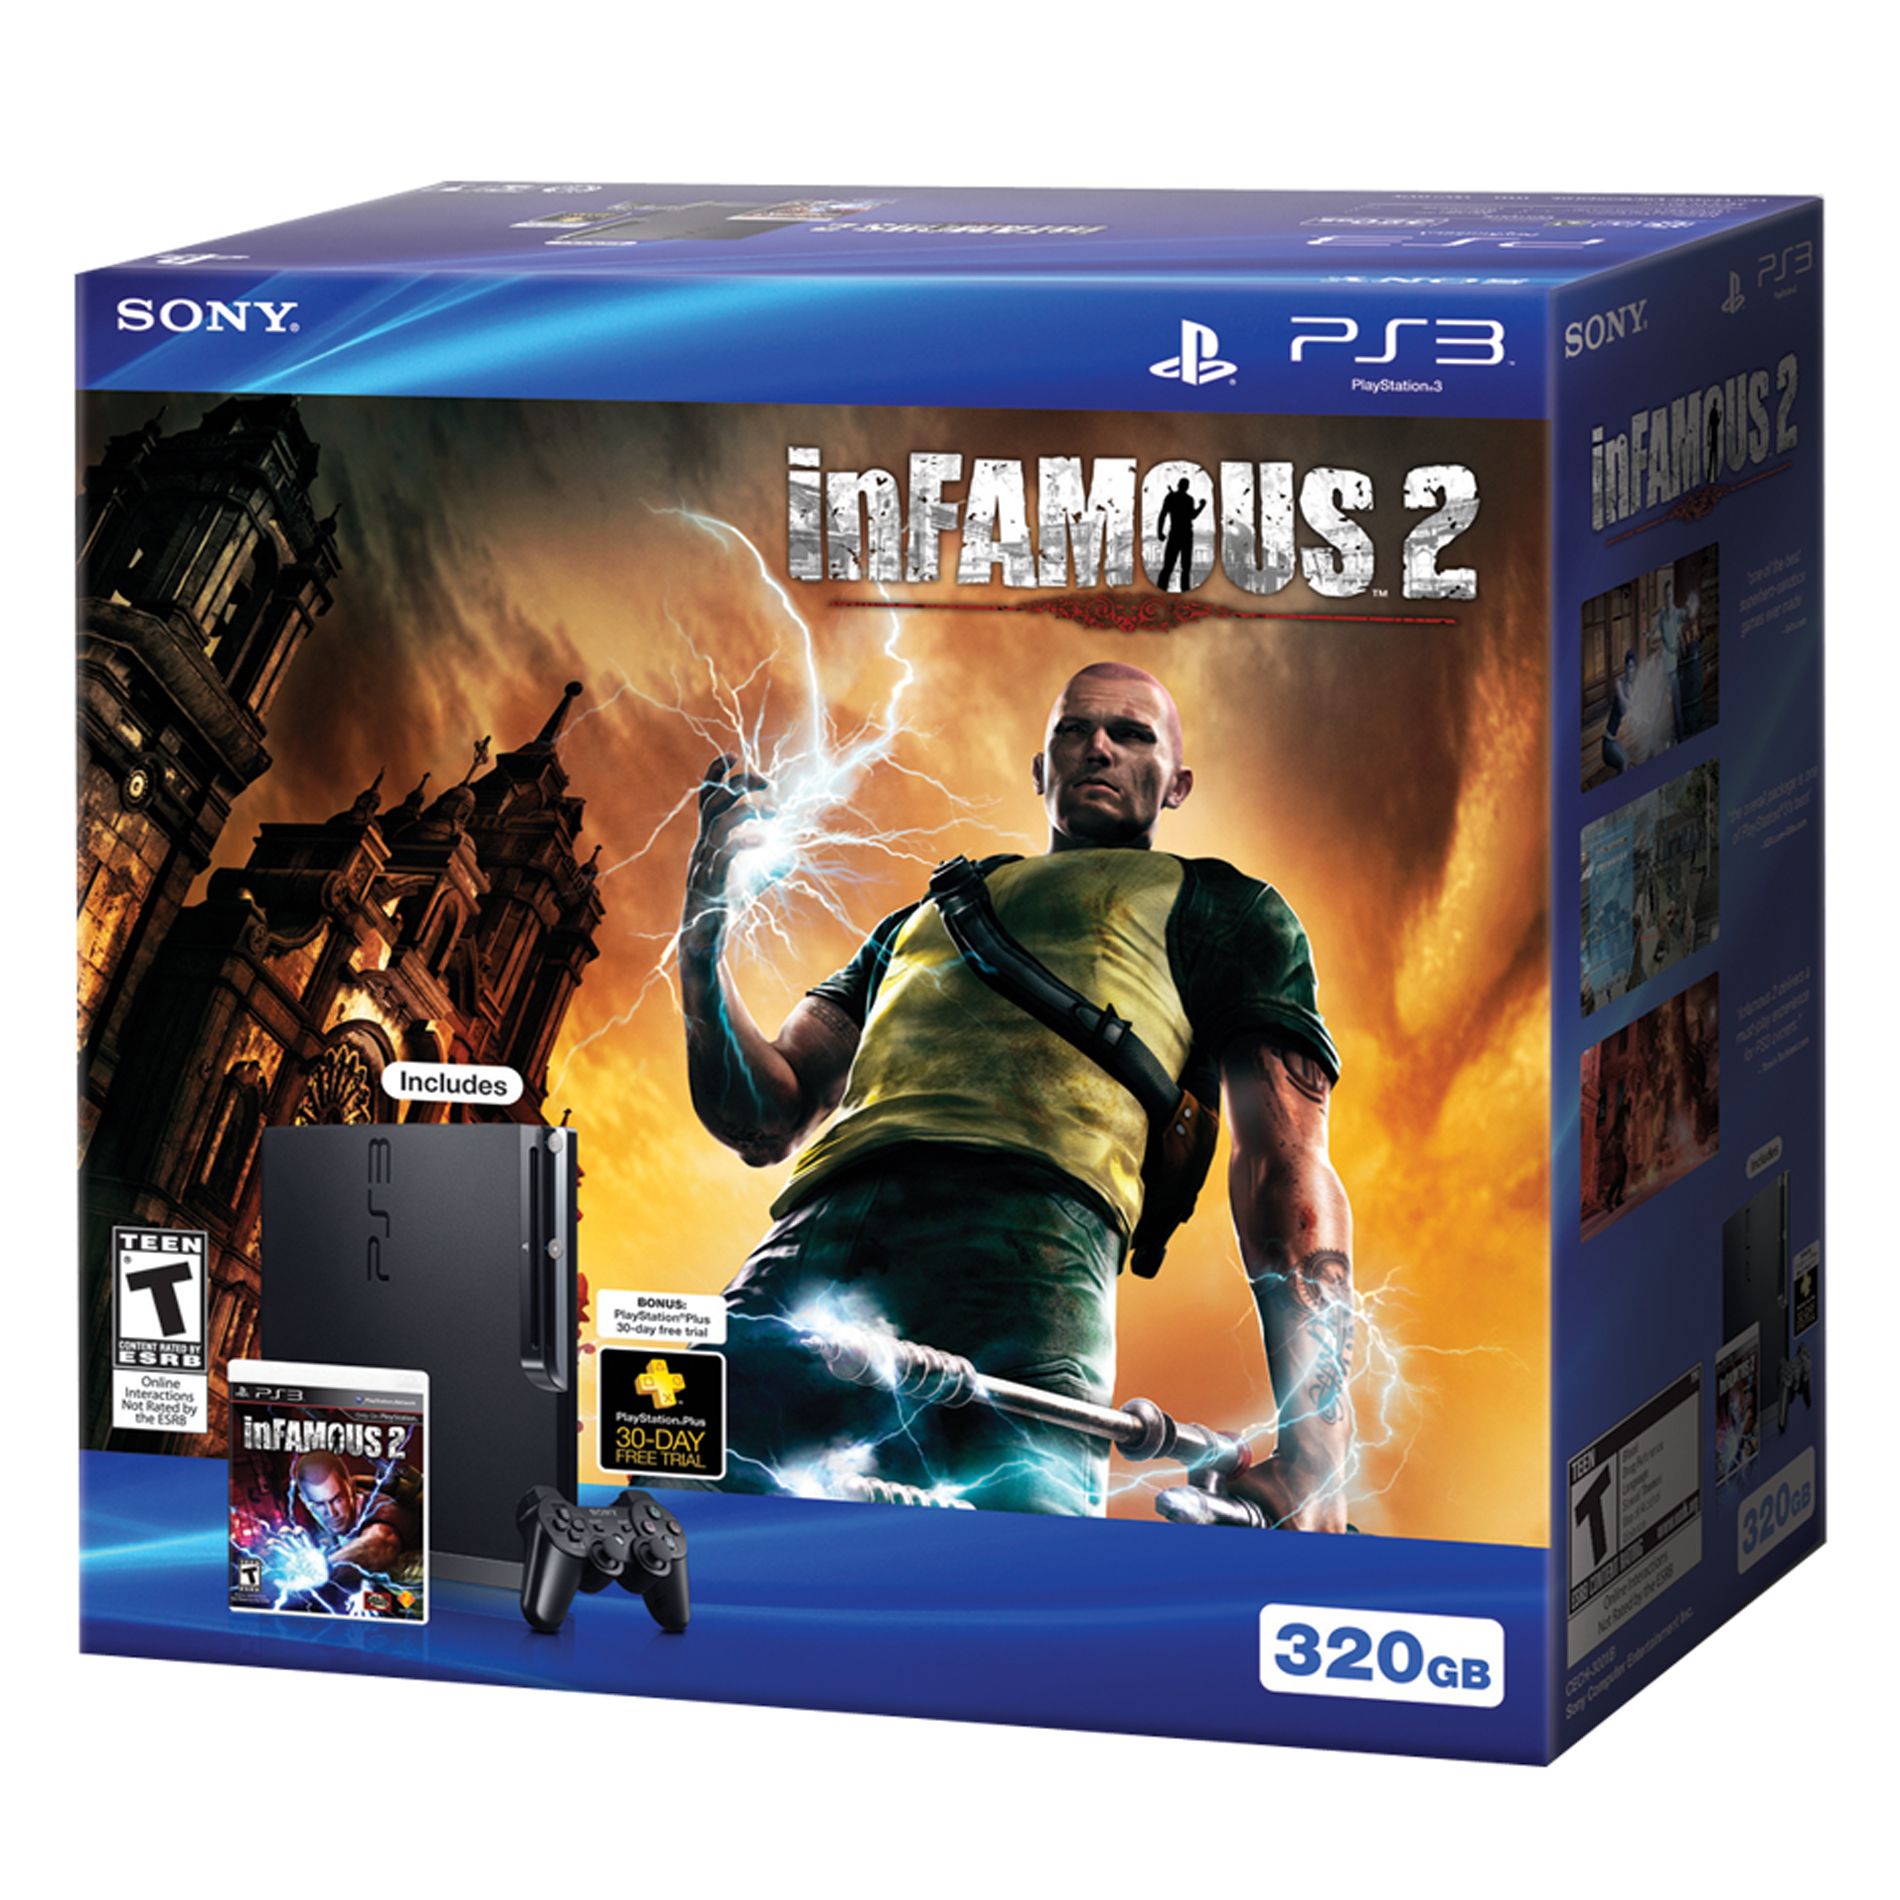 Sony PS3 320GB System with inFAMOUS 2 Game Bundle - TVs 